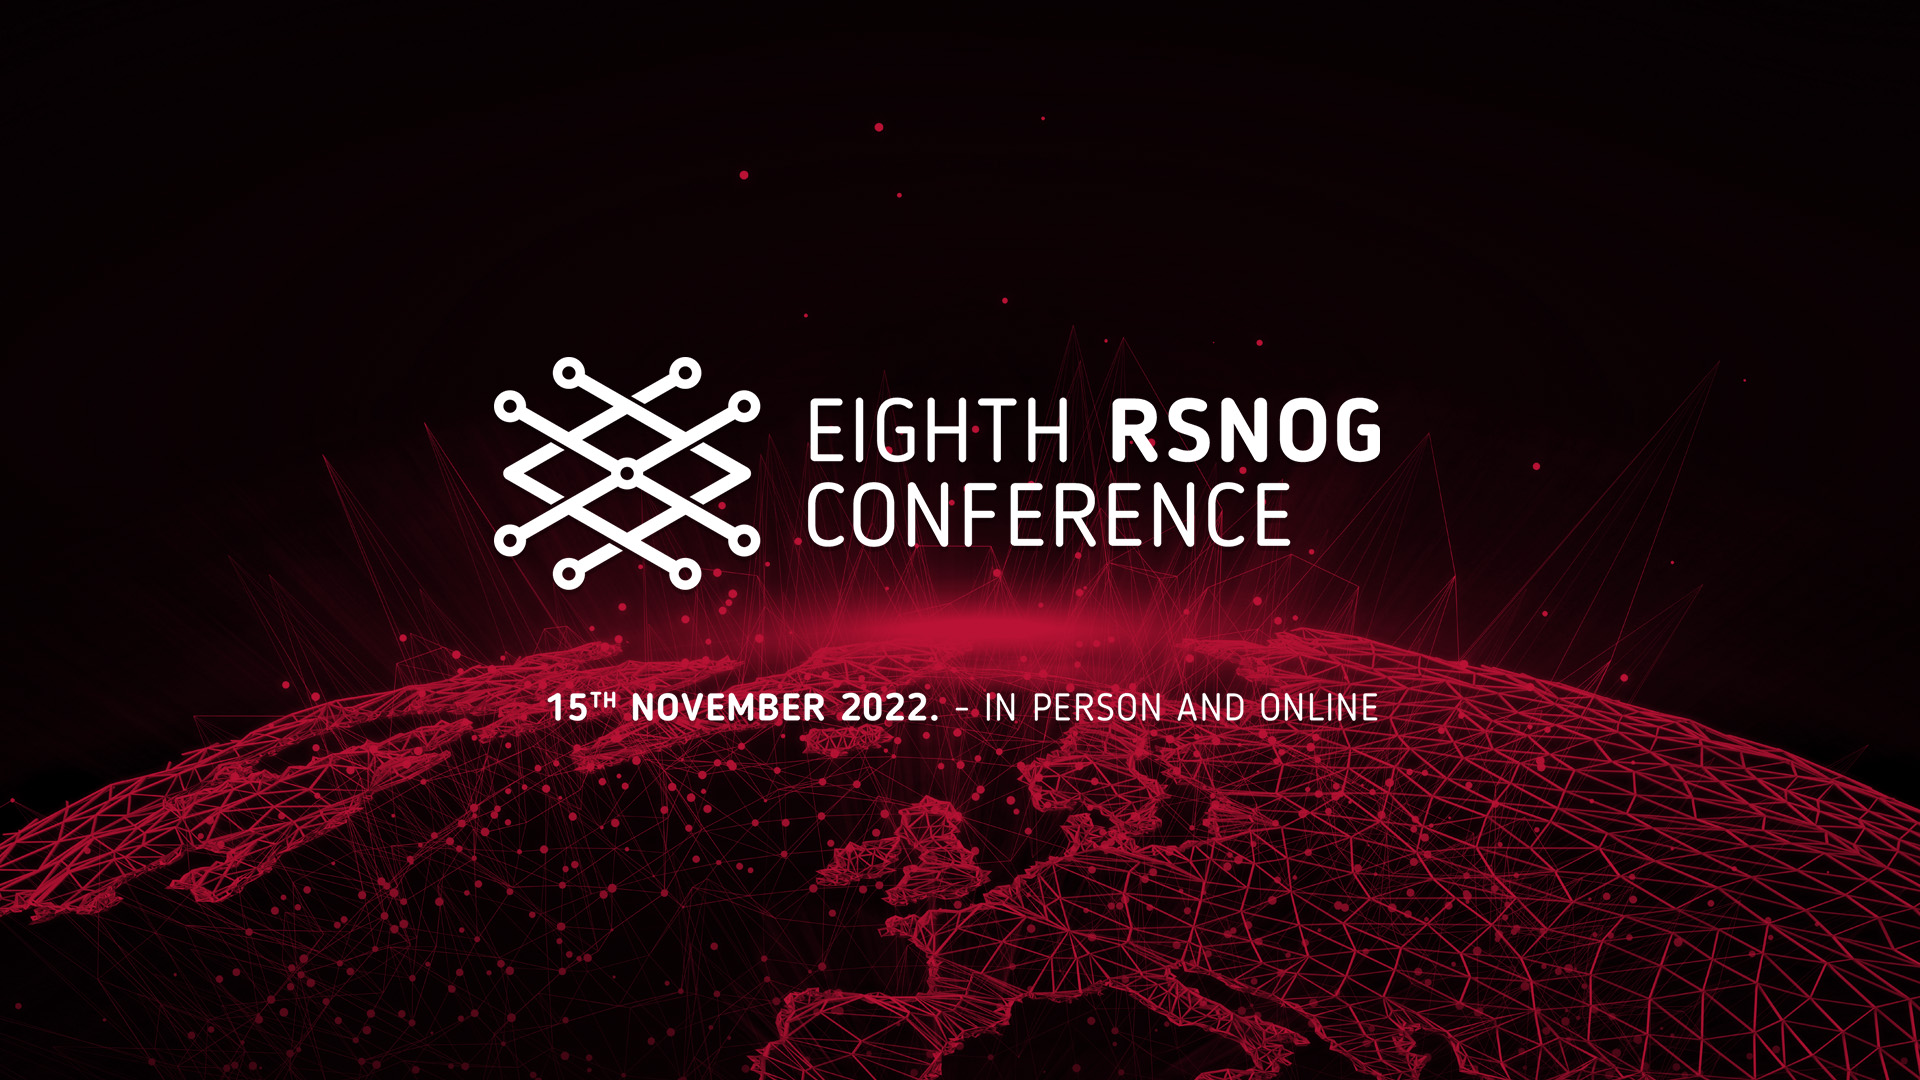 The Eighth RSNOG conference held